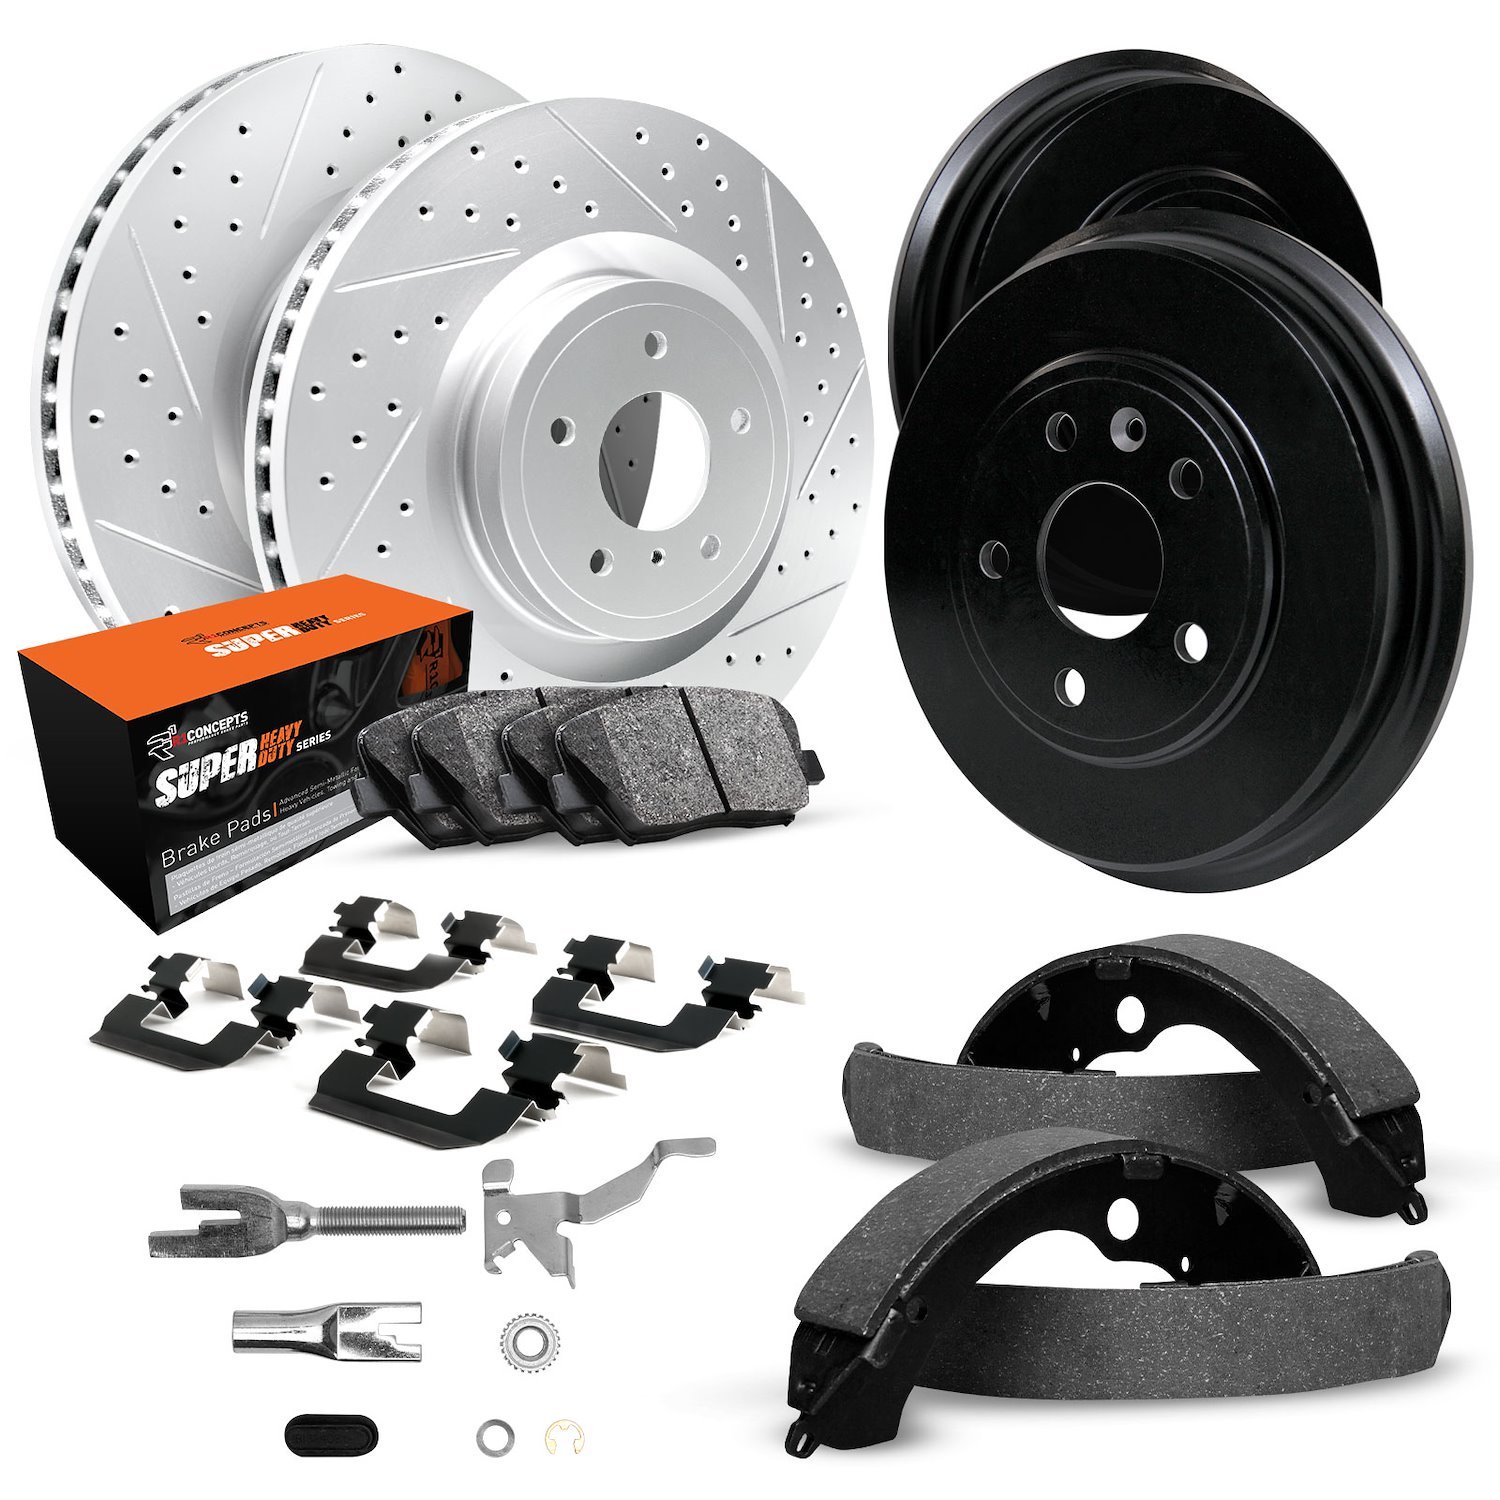 GEO-Carbon Drilled/Slotted Rotors/Drums w/Super-Duty Pads/Shoes/Hardware/Adjusters, 1990-2002 GM, Position: Front/Rear